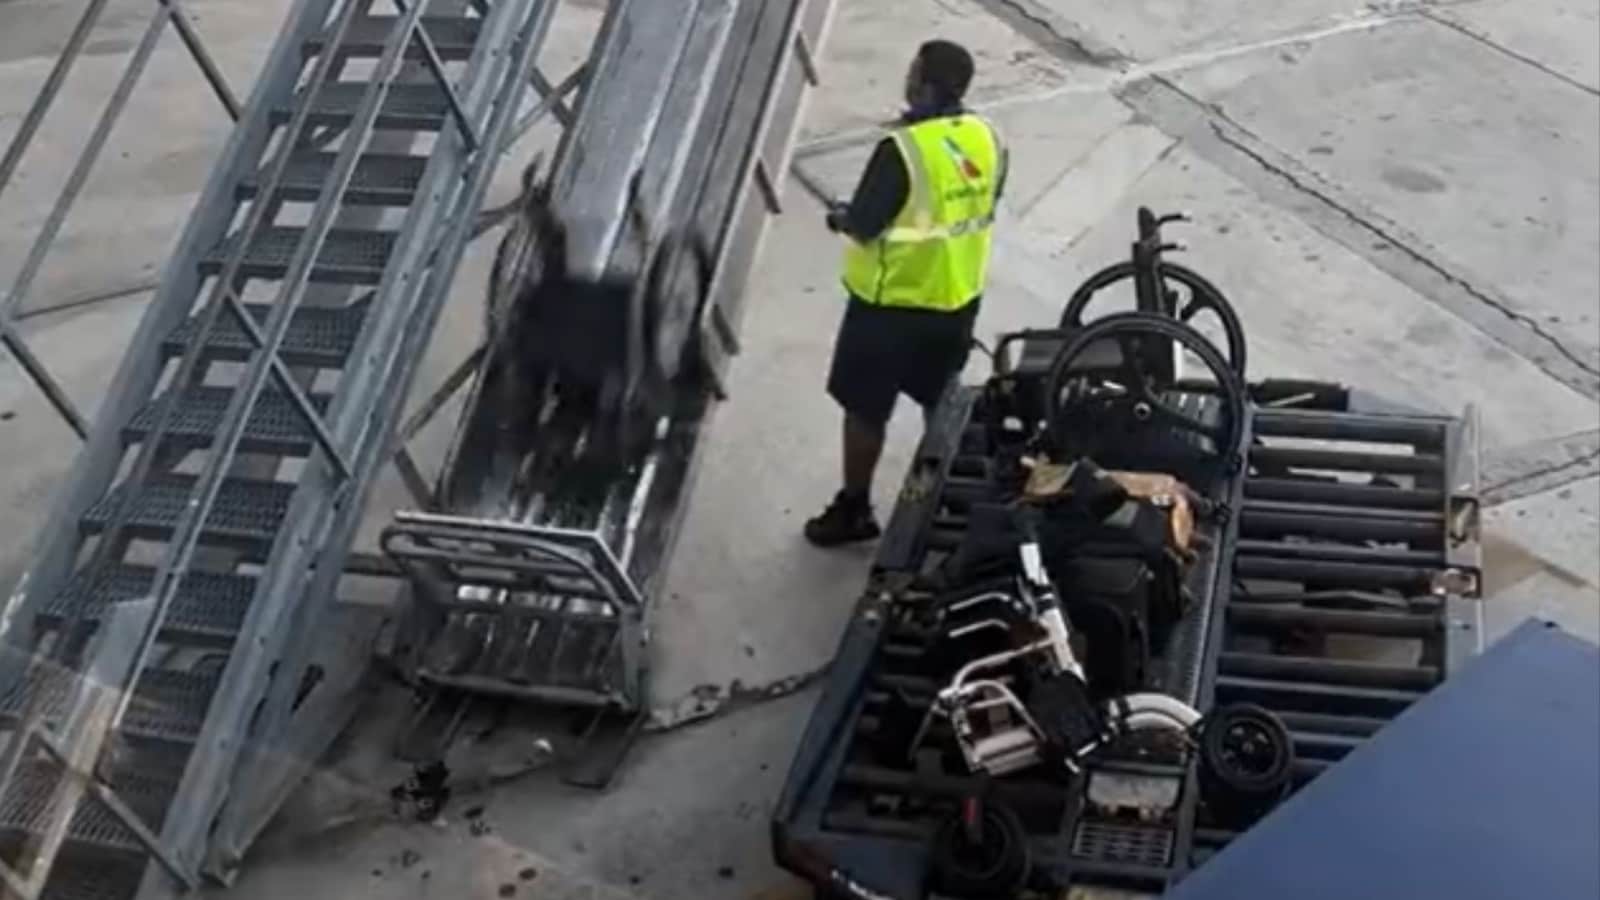 American Airlines staff mishandling a wheelchair caught on video, company responds